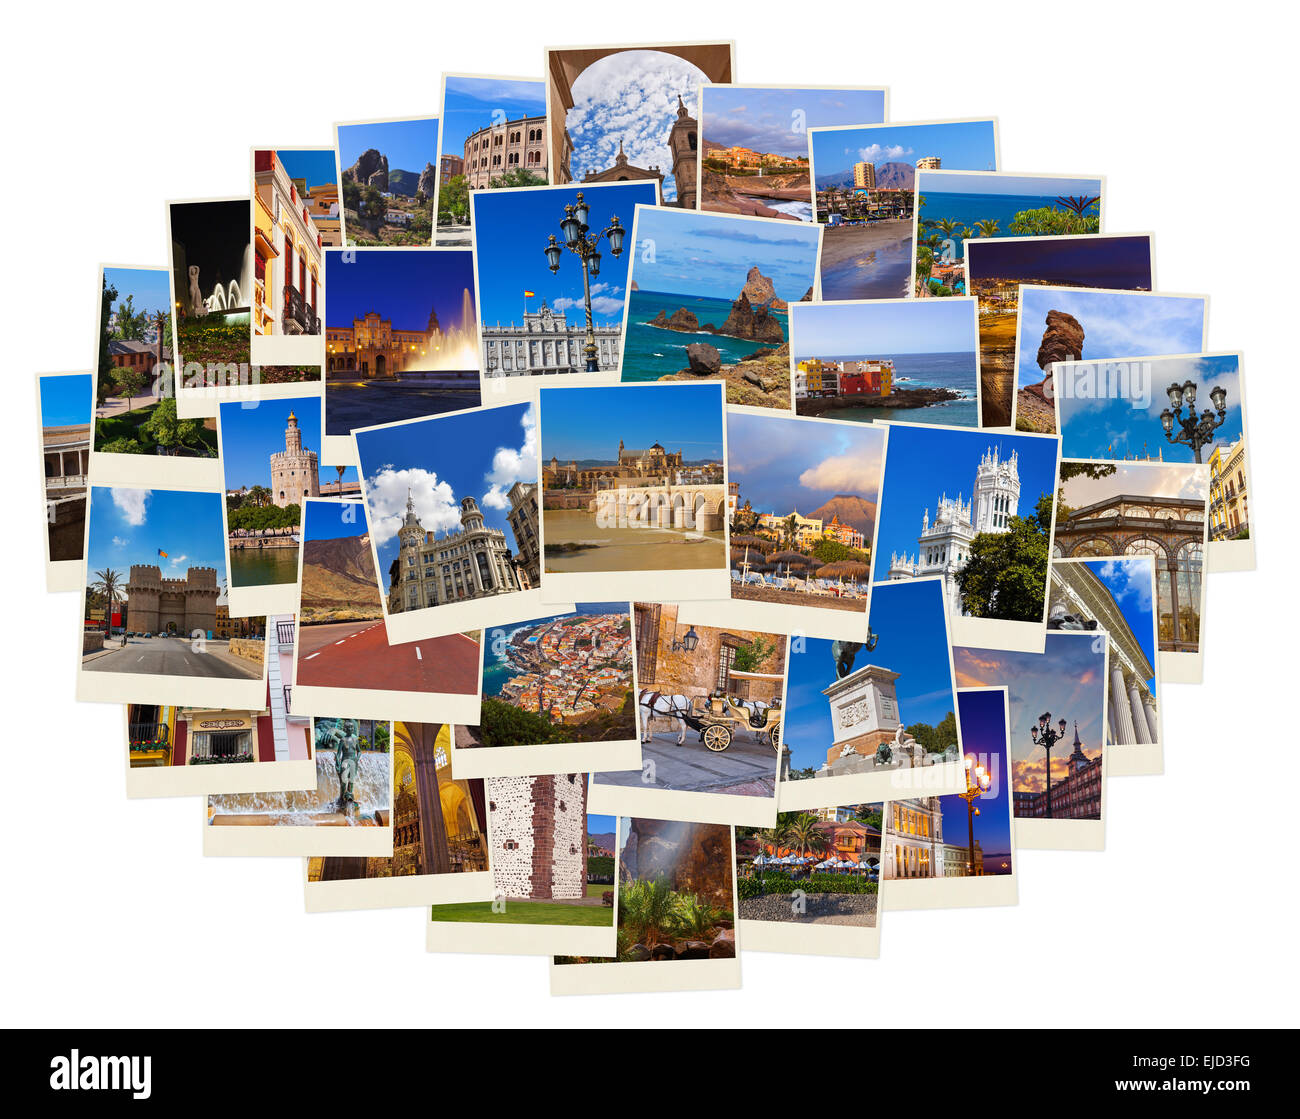 Spain travel images (my photos) Stock Photo